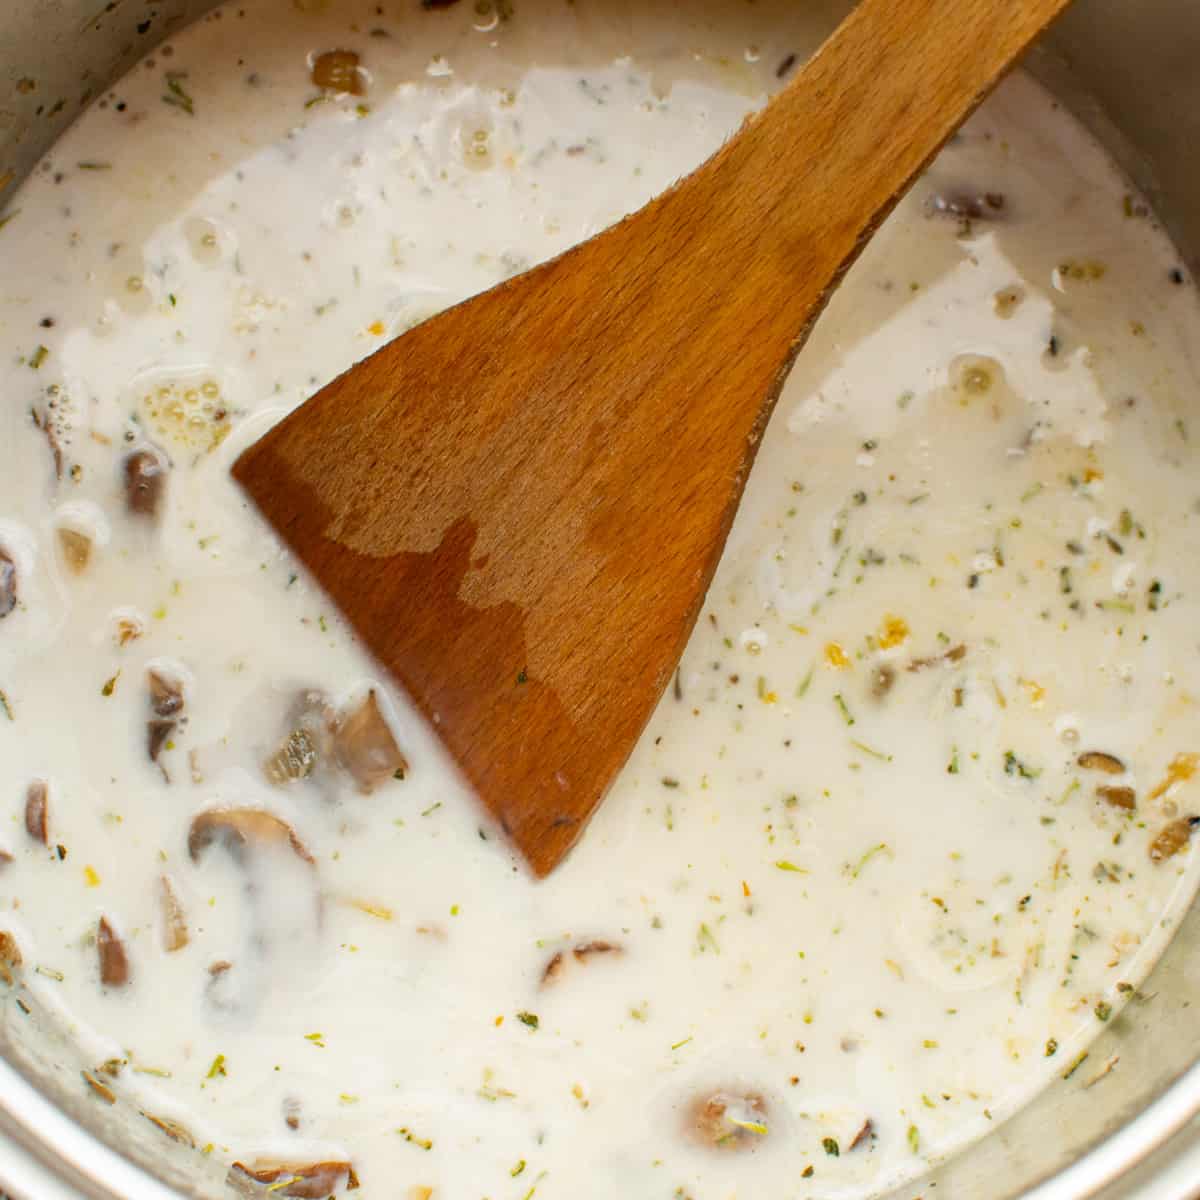 A wooden spatula stirs the soup.